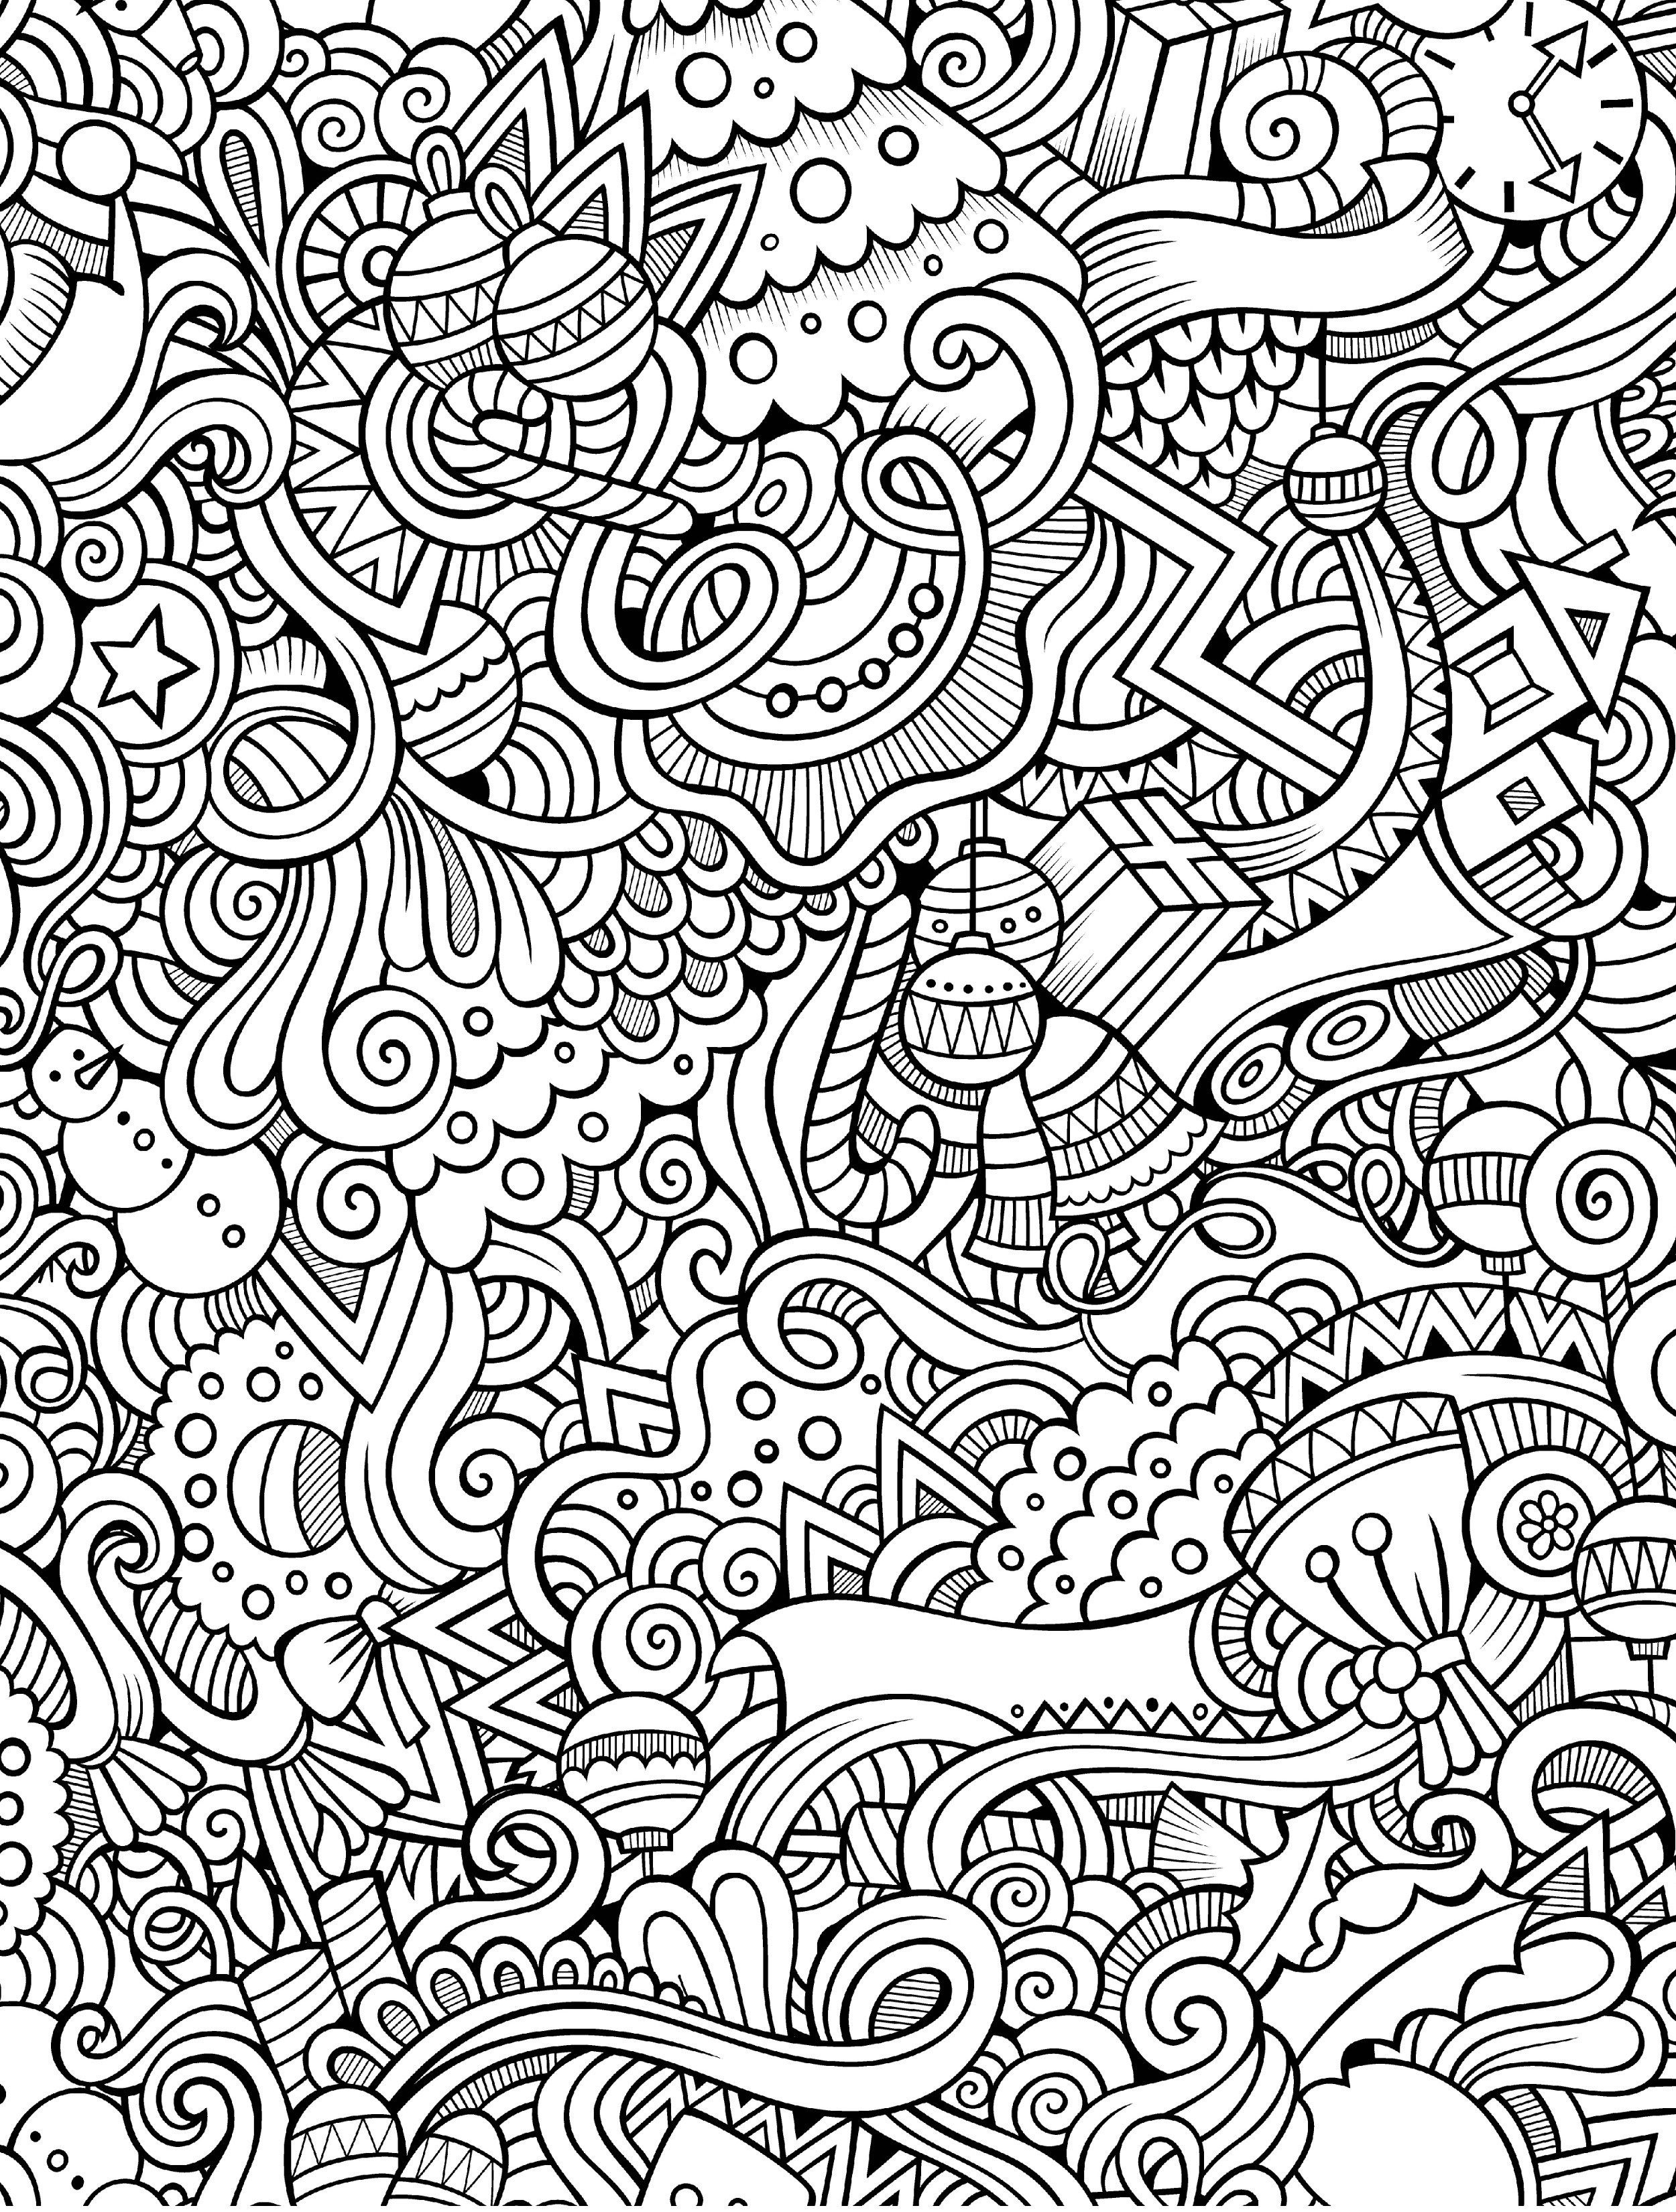 10 Free Printable Holiday Adult Coloring Pages | Coloring Pages - Free Printable Coloring Designs For Adults